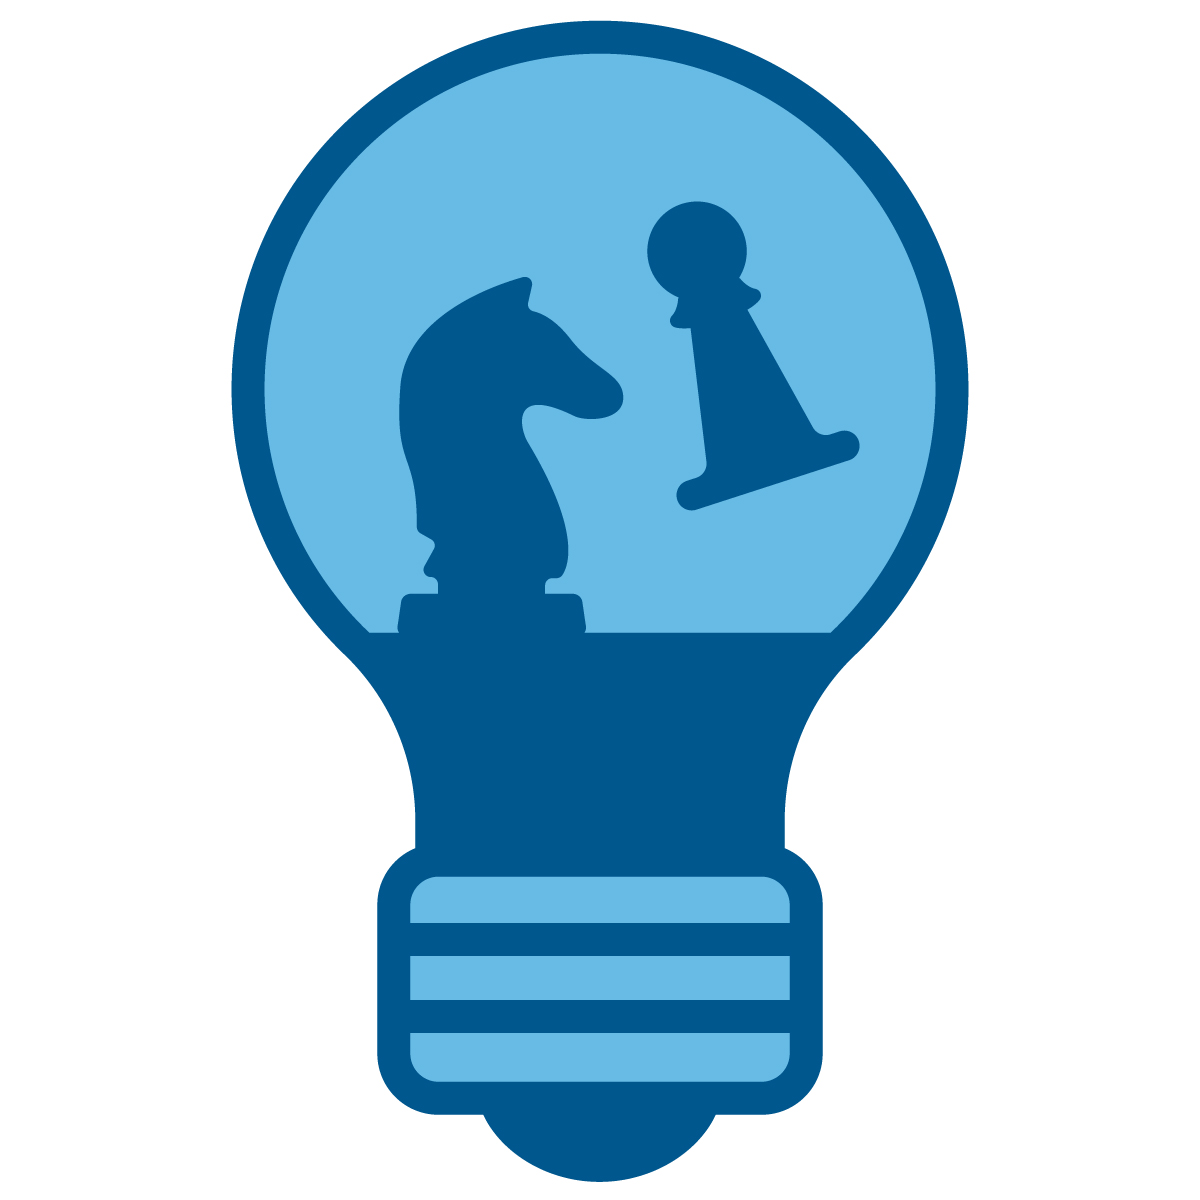 A lightbulb icon showing ideas being developed in stage 1